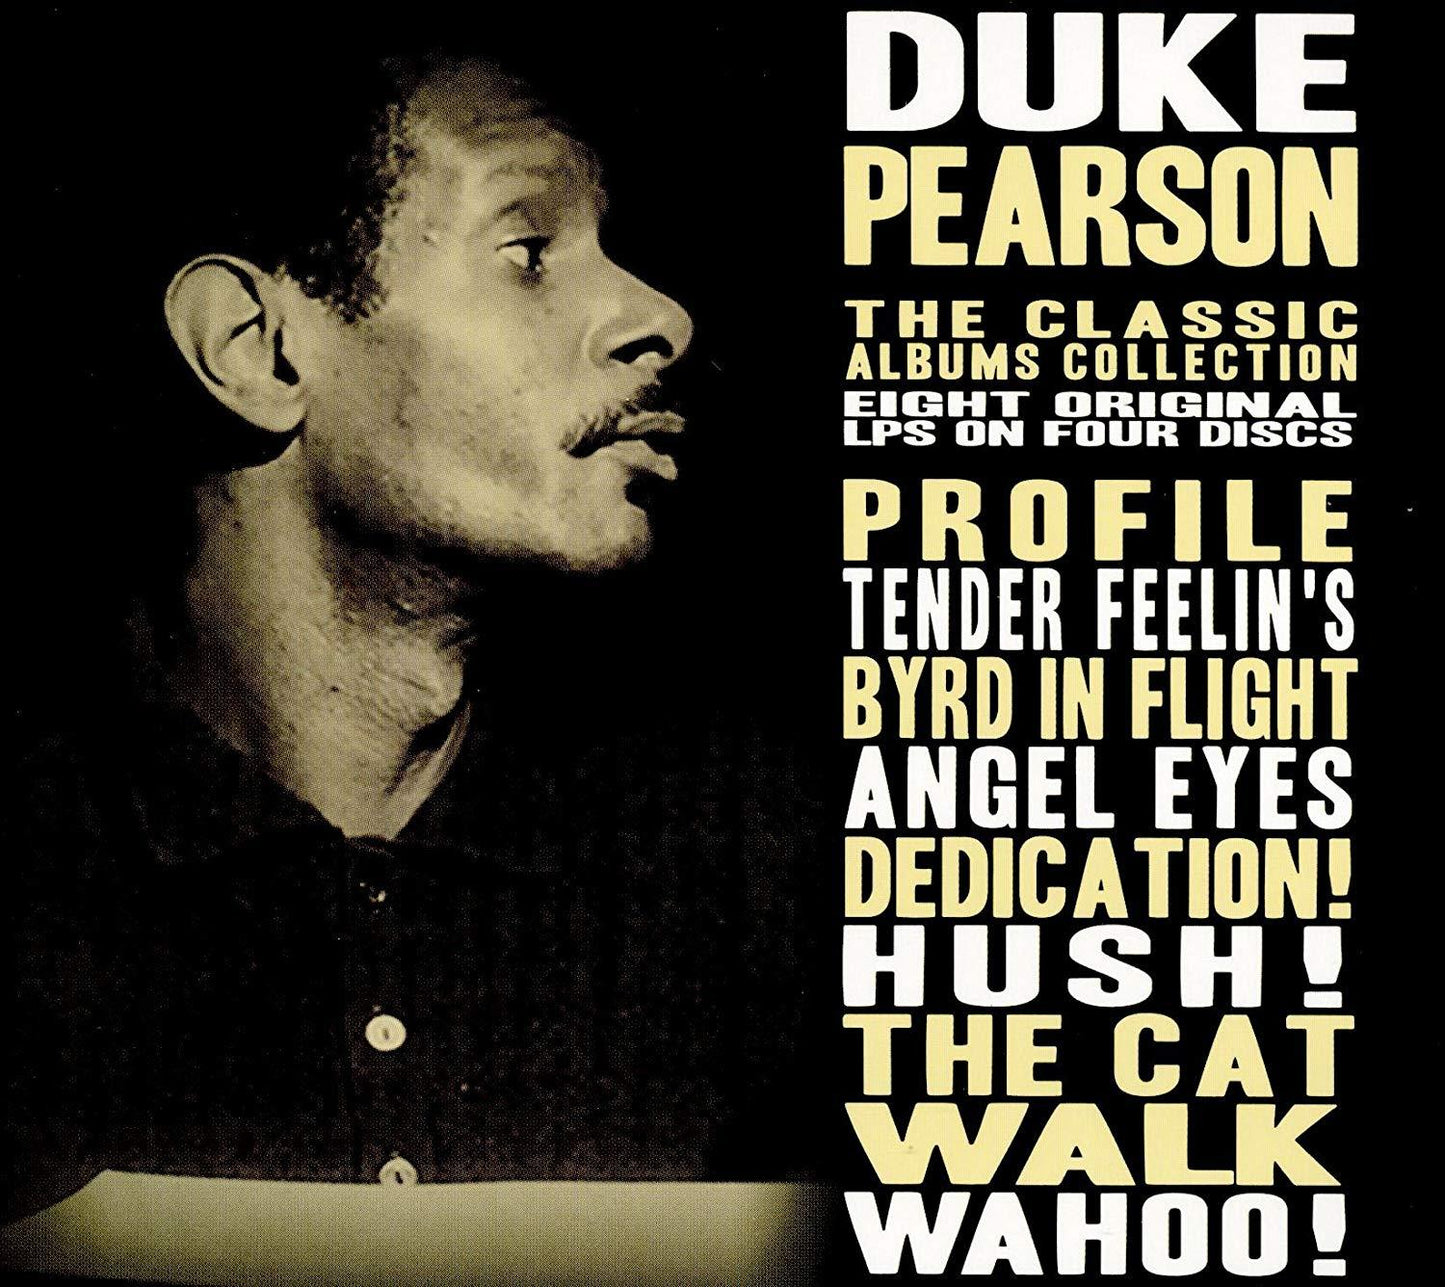 Duke Pearson - Classic Albums Collection (4 CDS)